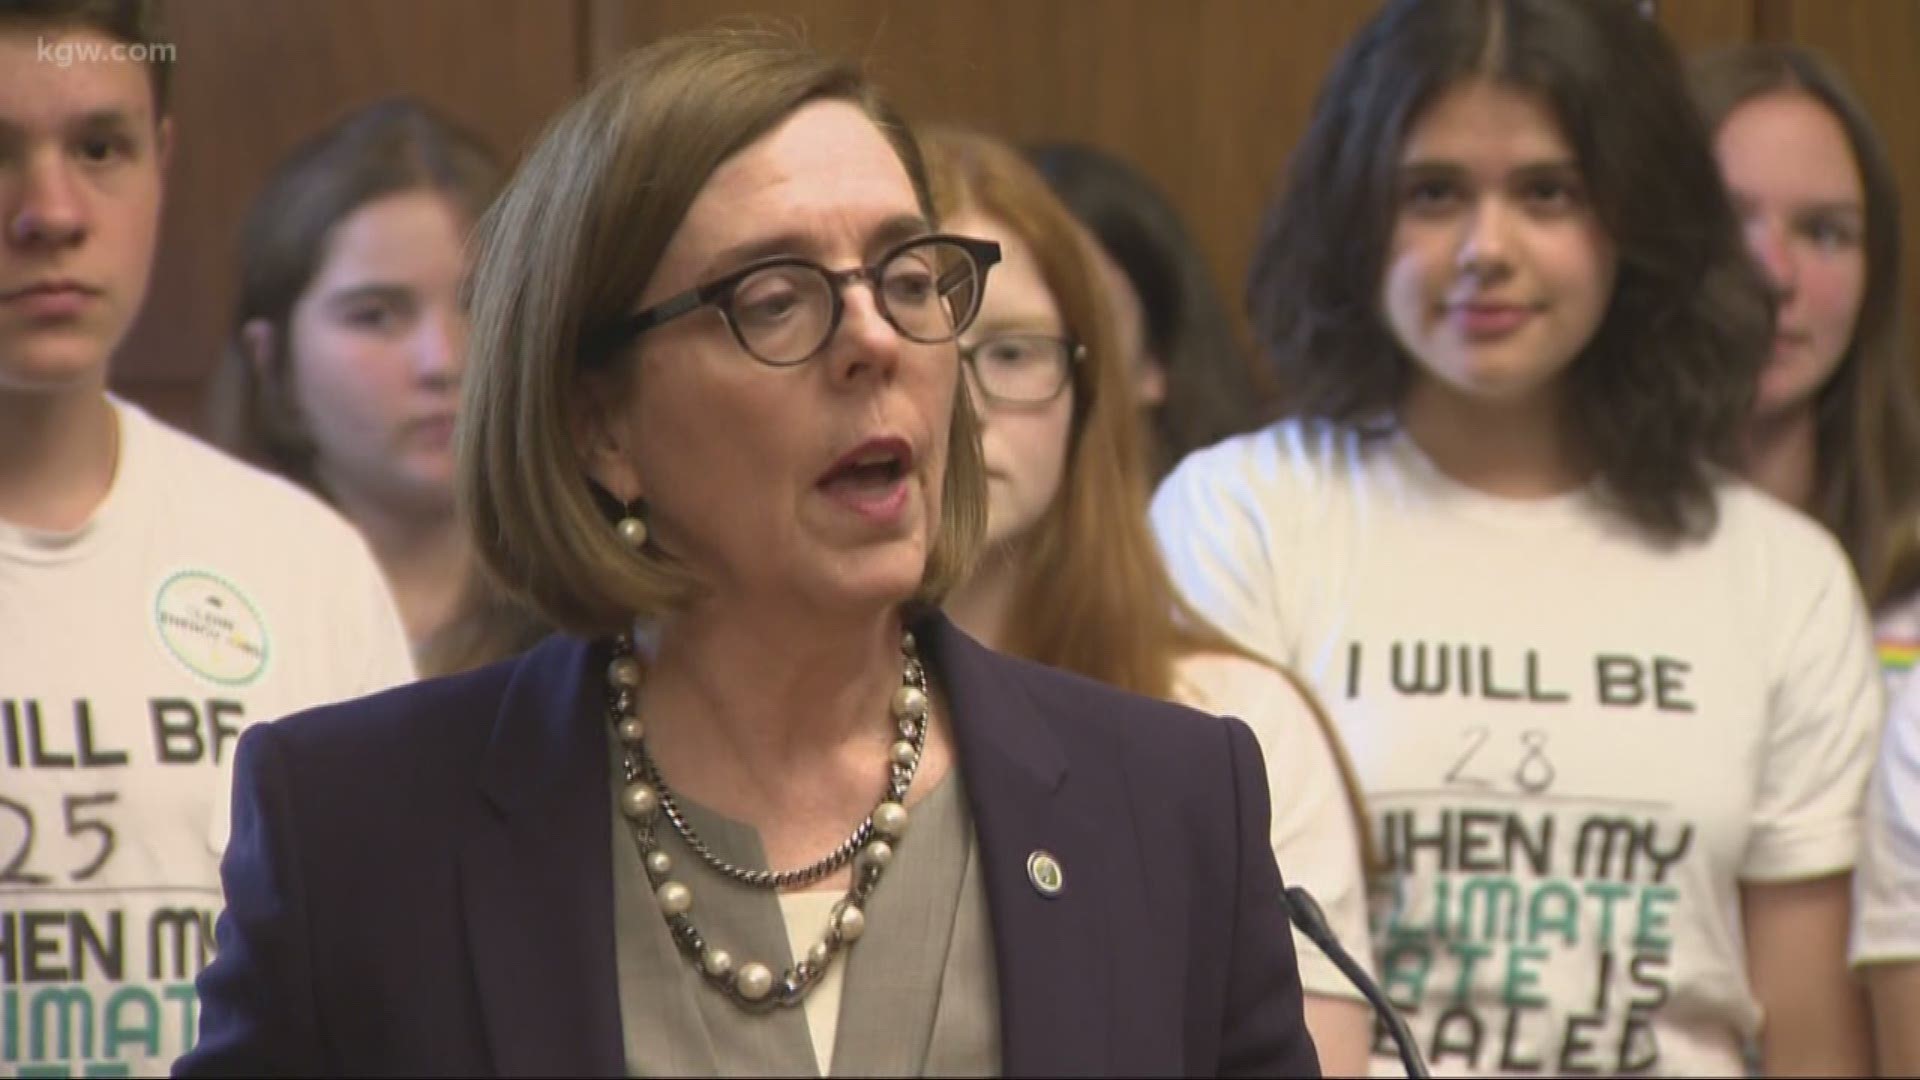 Oregon Gov. Kate Brown has ordered state police to round up Republicans who walked out.